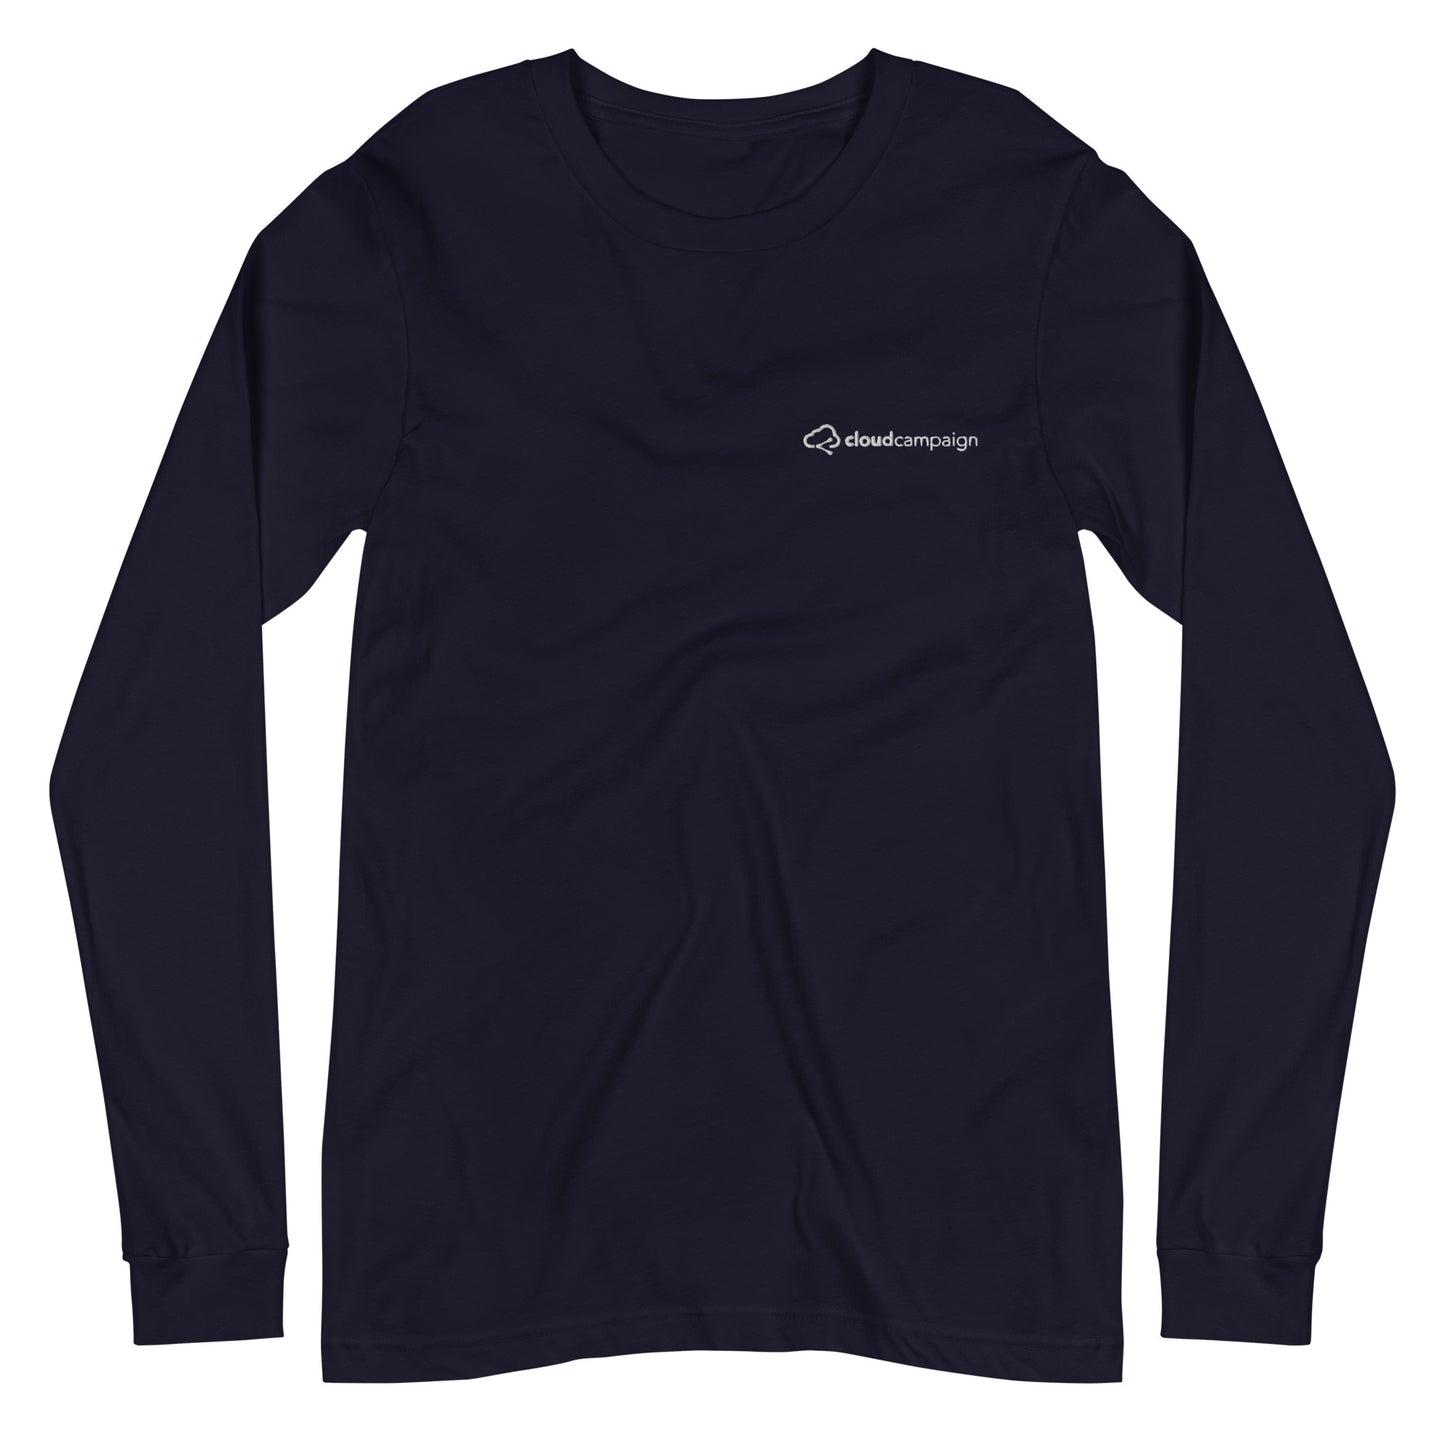 Unisex Long Sleeve Tee w/ white Cloud Campaign embroidery